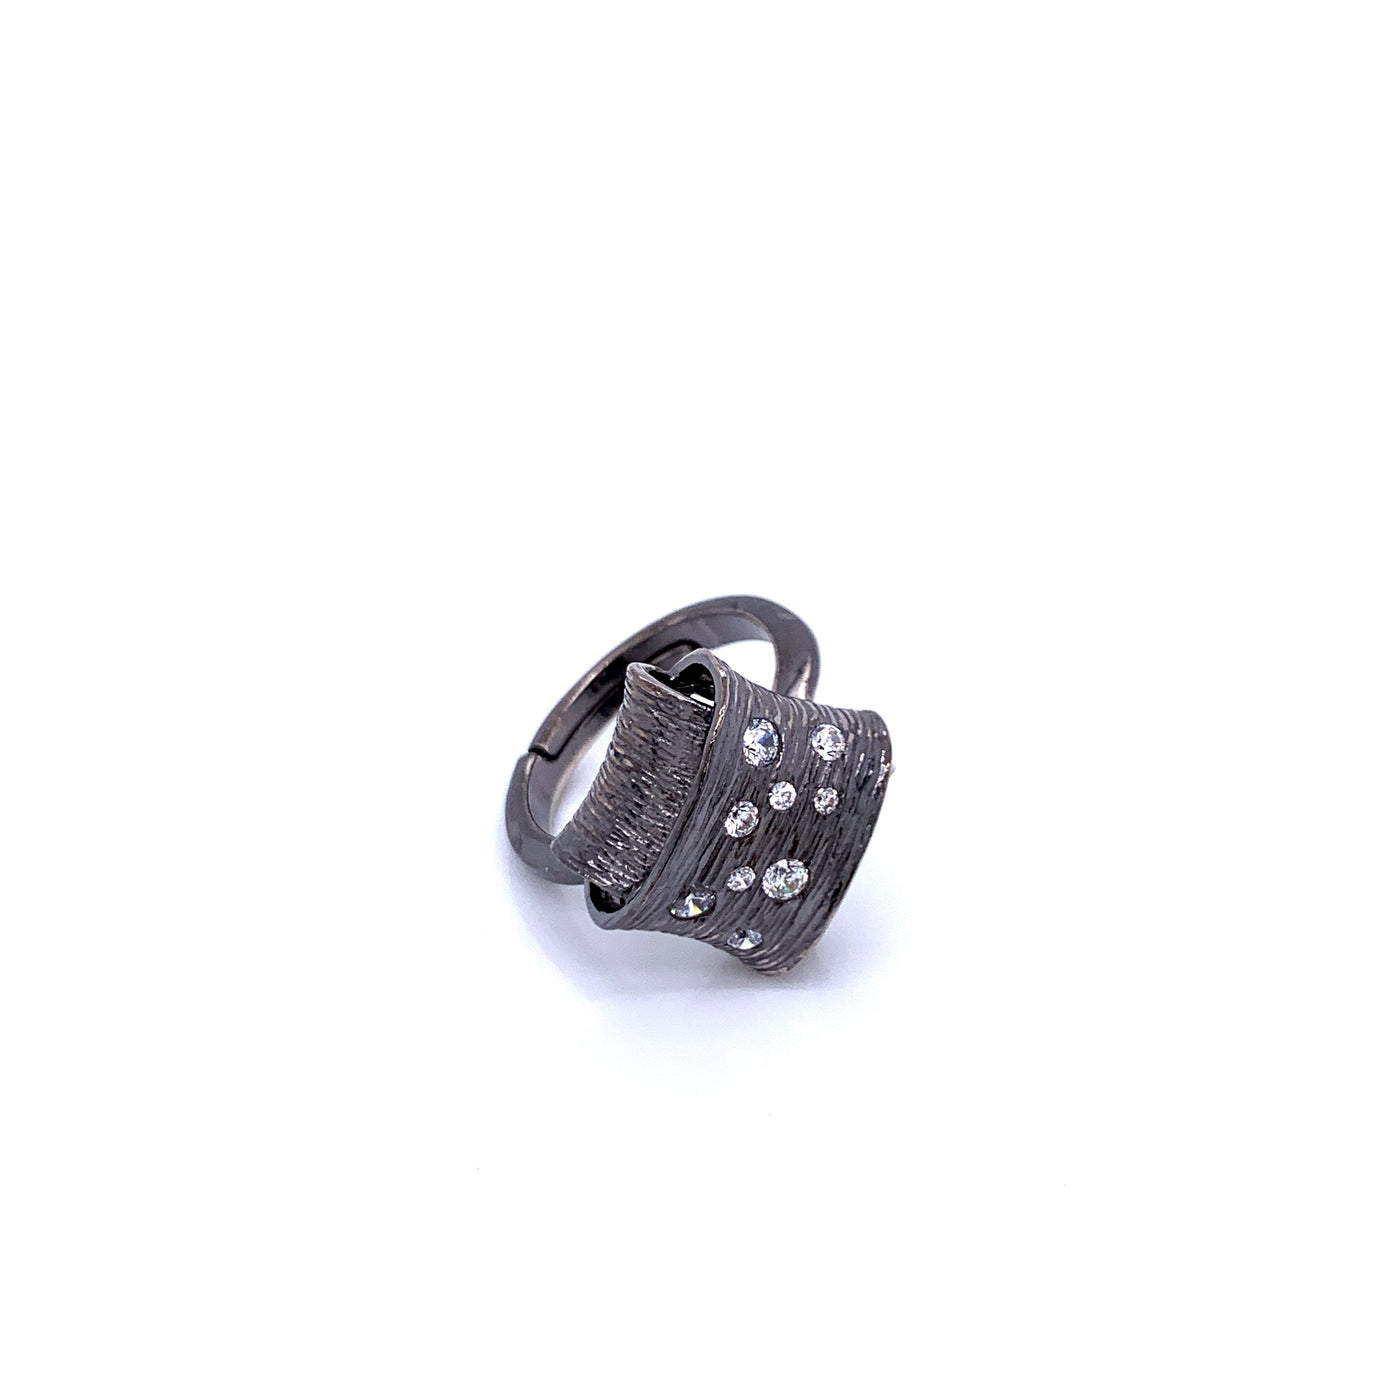 IL Diletto - Silver Ring, Folded Square, Cubic Zirconia, Size 6, Open Shank, Ruthenium Plated